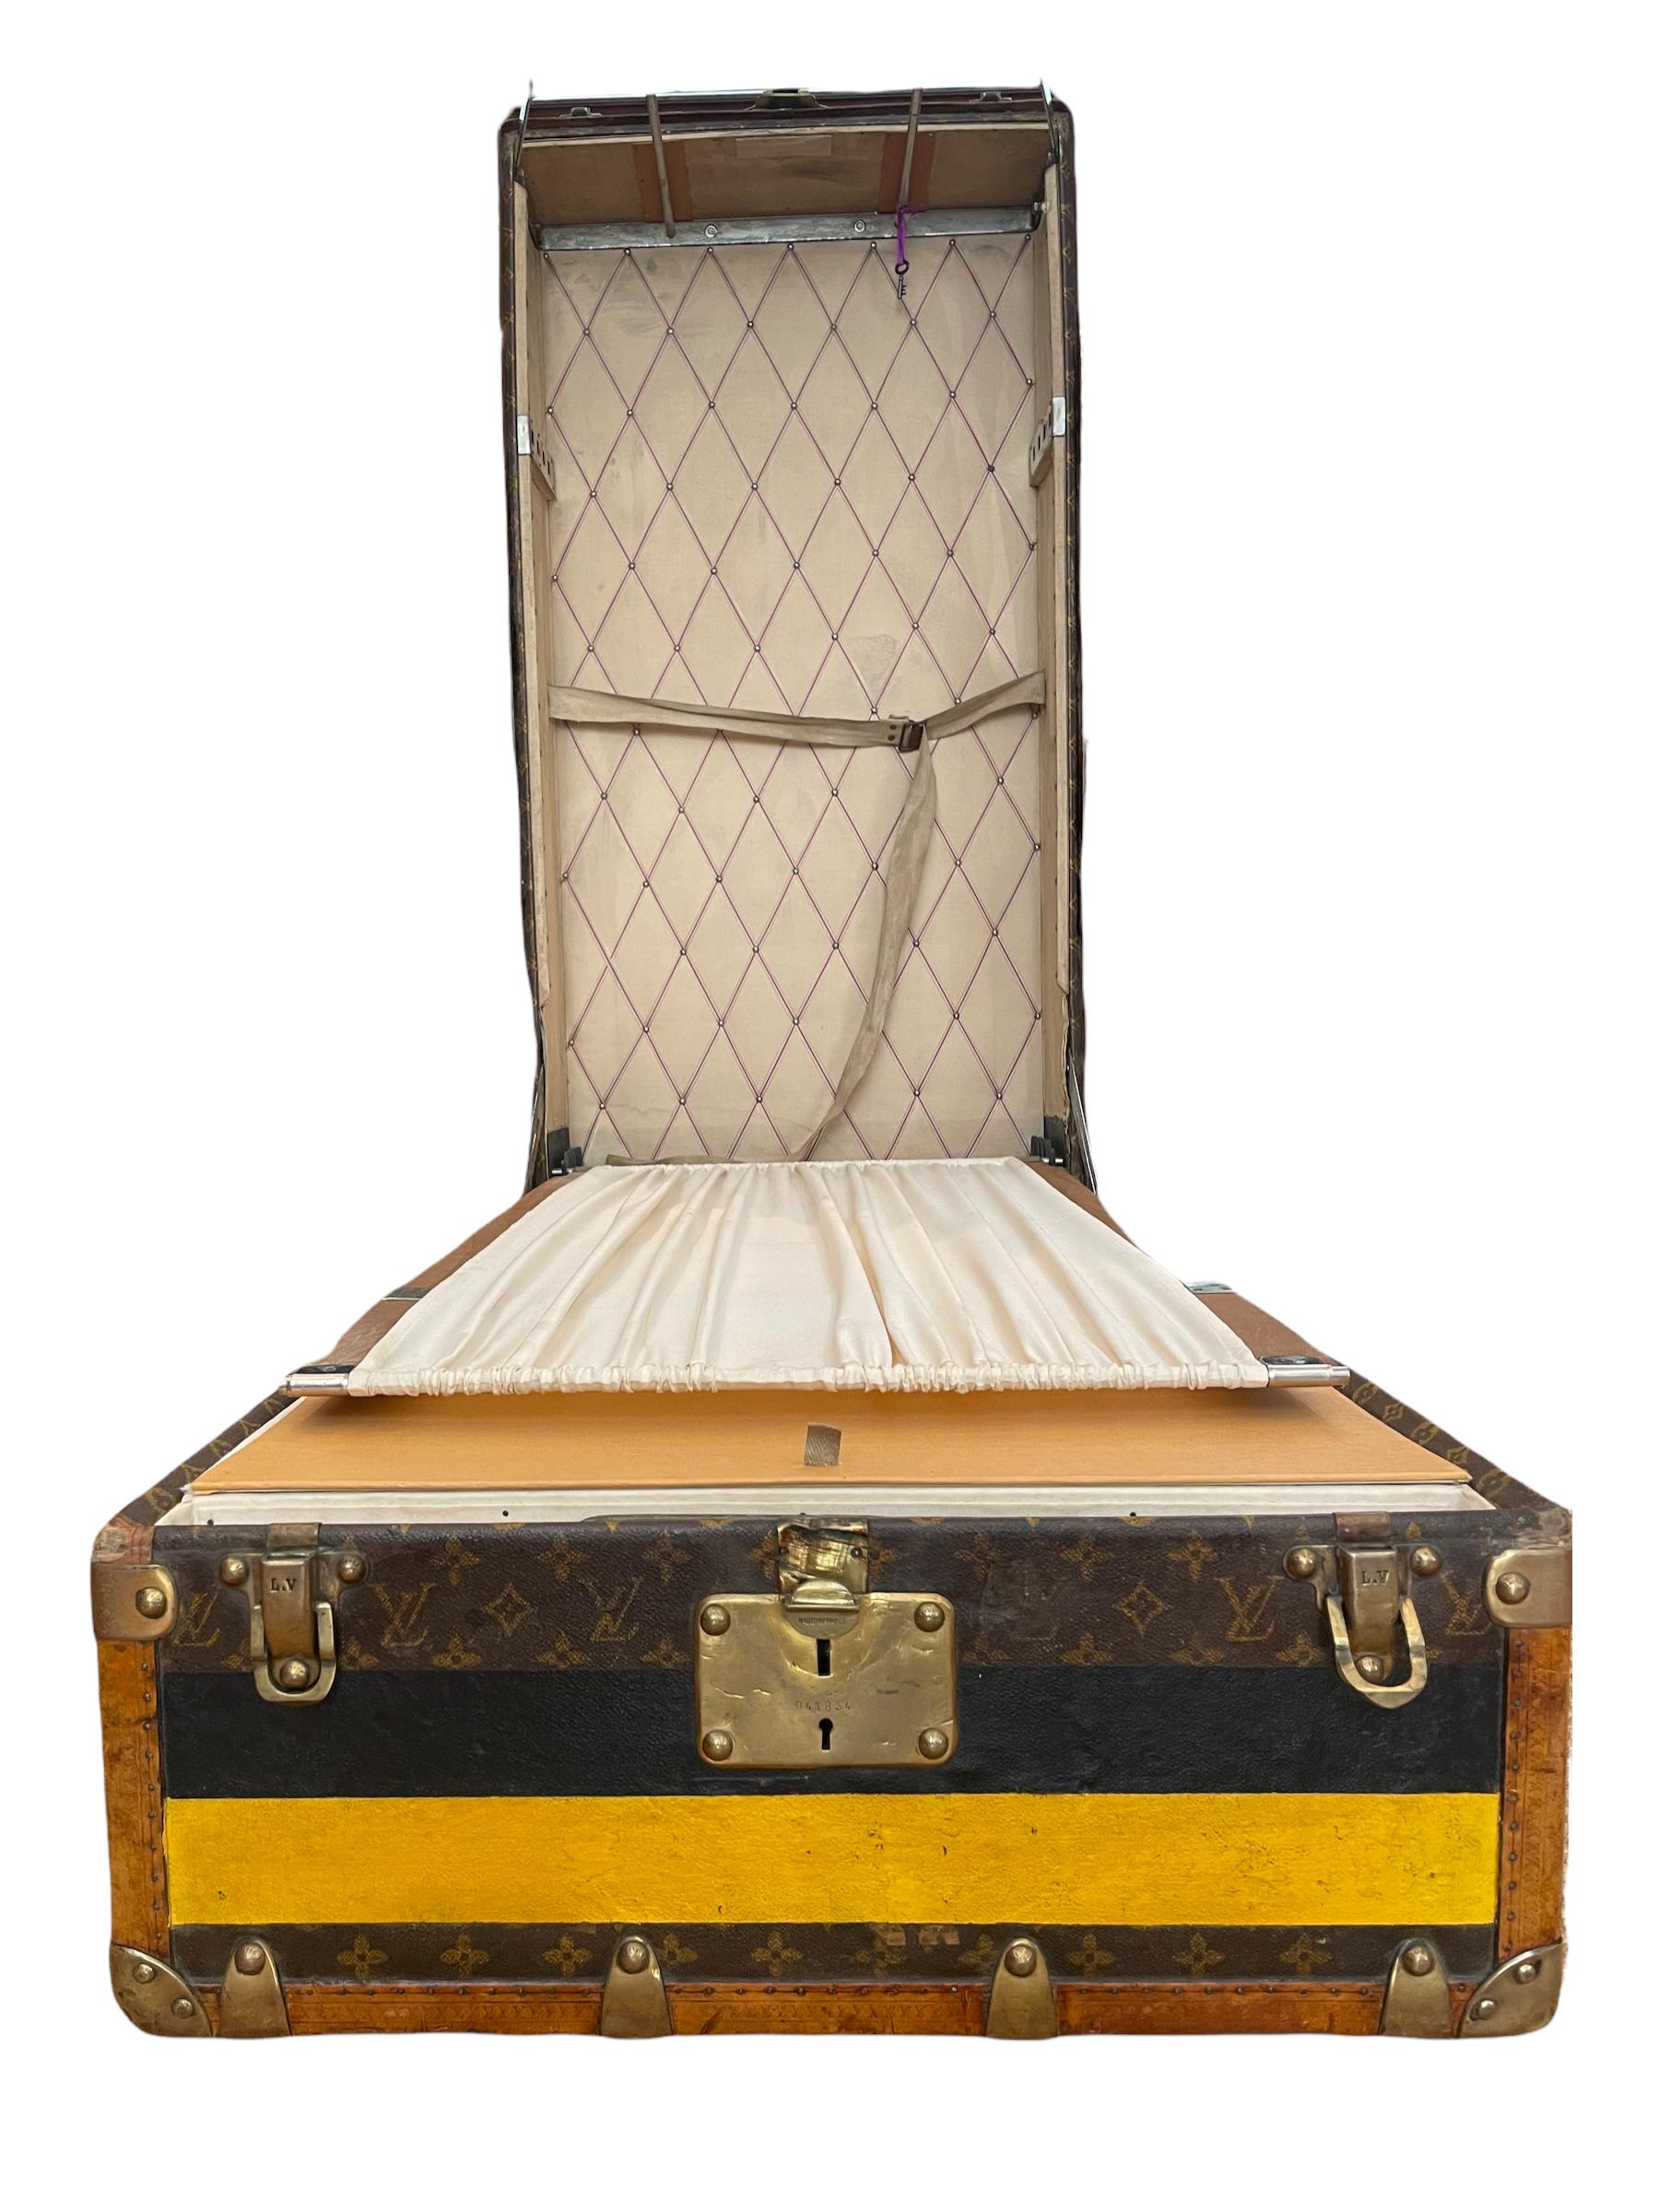 Exceptional Louis Vuitton wardrobe trunk features stenciled monogram canvas; brown loziné LV stamped solid brass locks and studs. Customized yellow and black stripes give a lot of character to this elegant piece.

The interior is original and